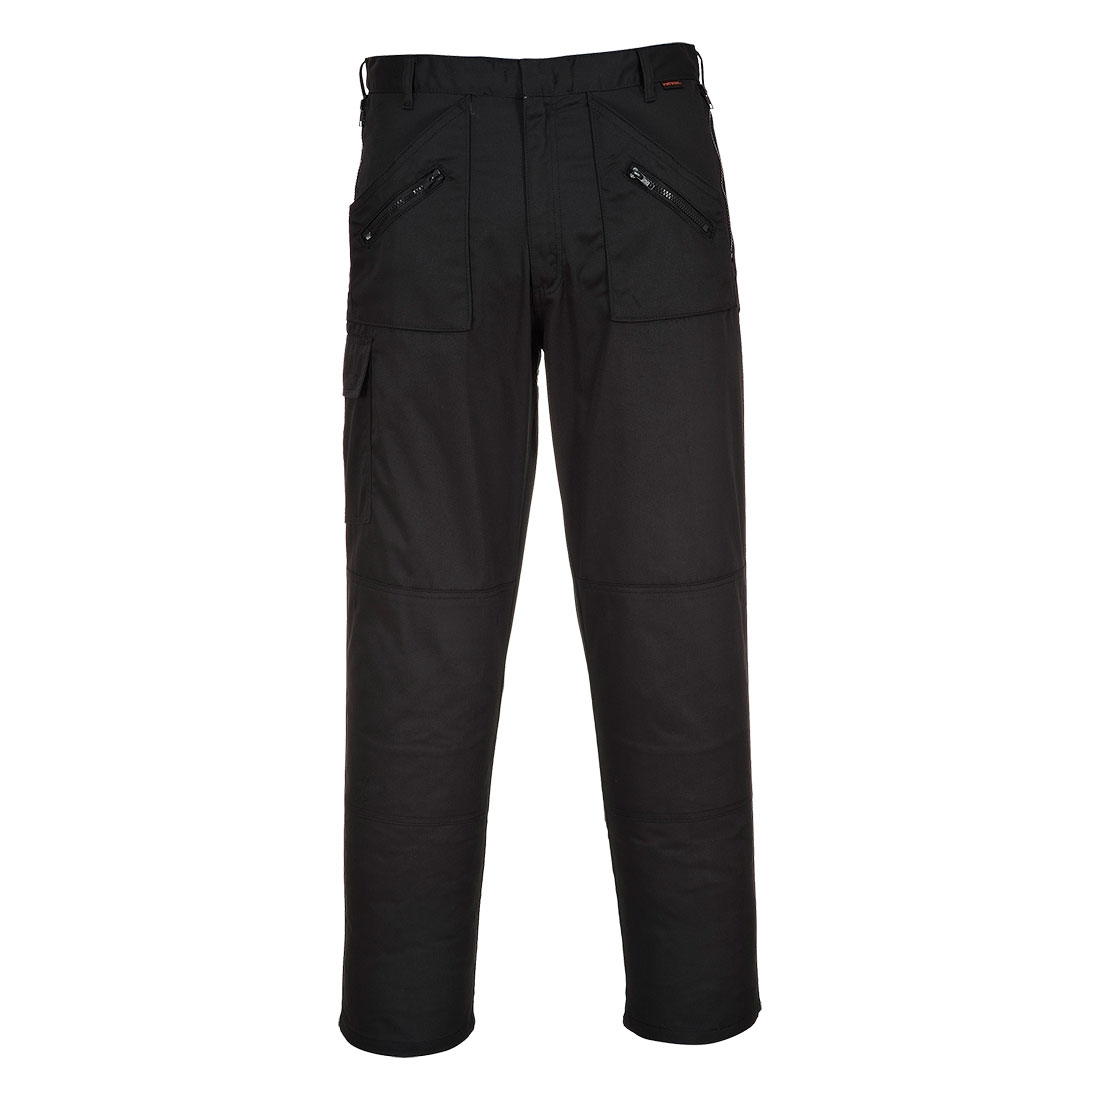 Action Trouser Black – 36 – Work Safety Protective Equipment – Portwest – Regus Supply